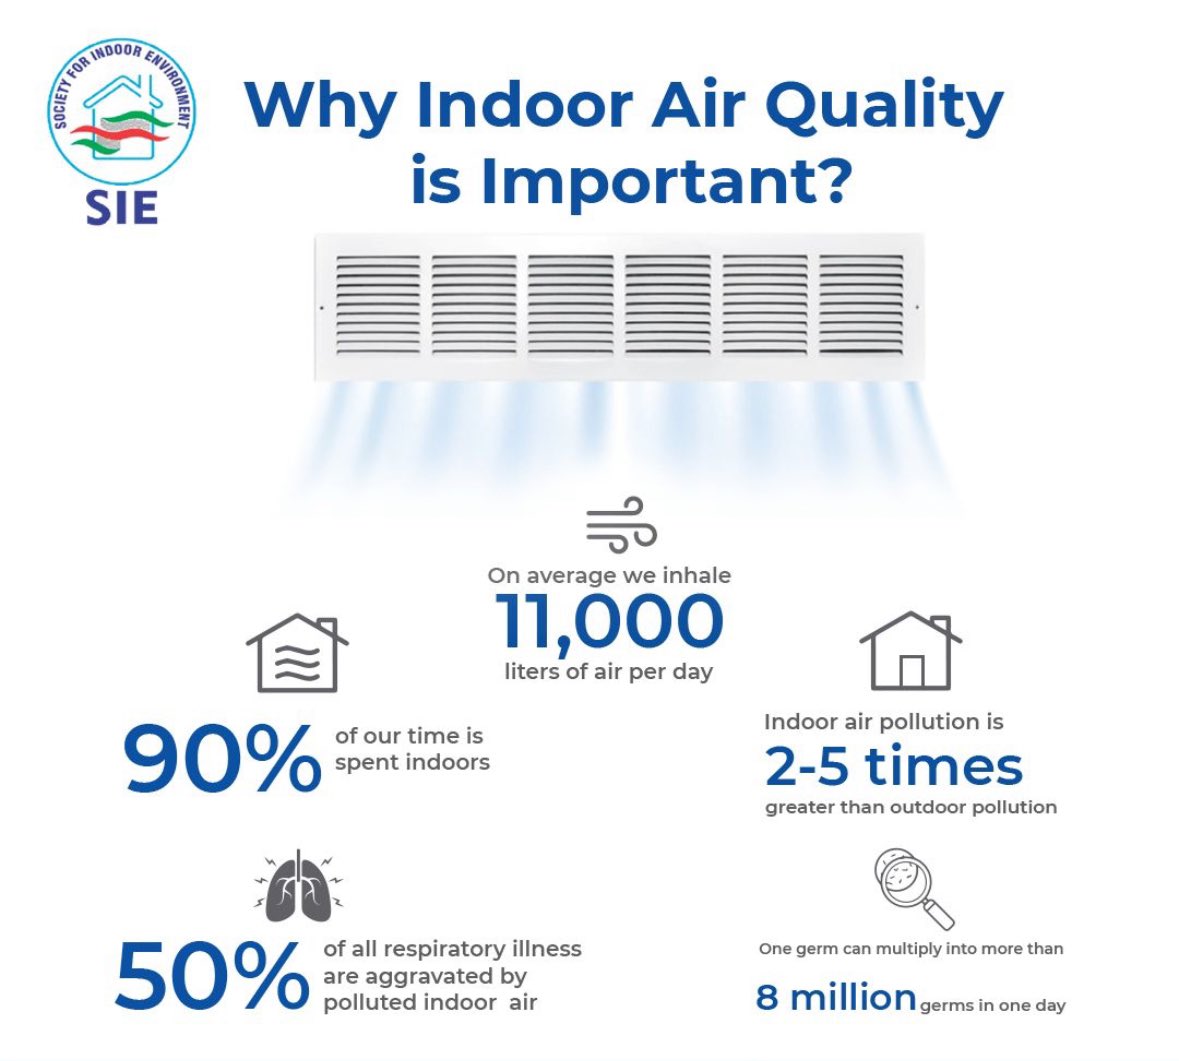 Breathing clean indoor air keeps us healthy and comfortable. Ensure optimal indoor air quality through effective ventilation and filtration systems for a healthier living environment.

 #SIE #IndoorAirQuality #IEQ #indoorenvironment